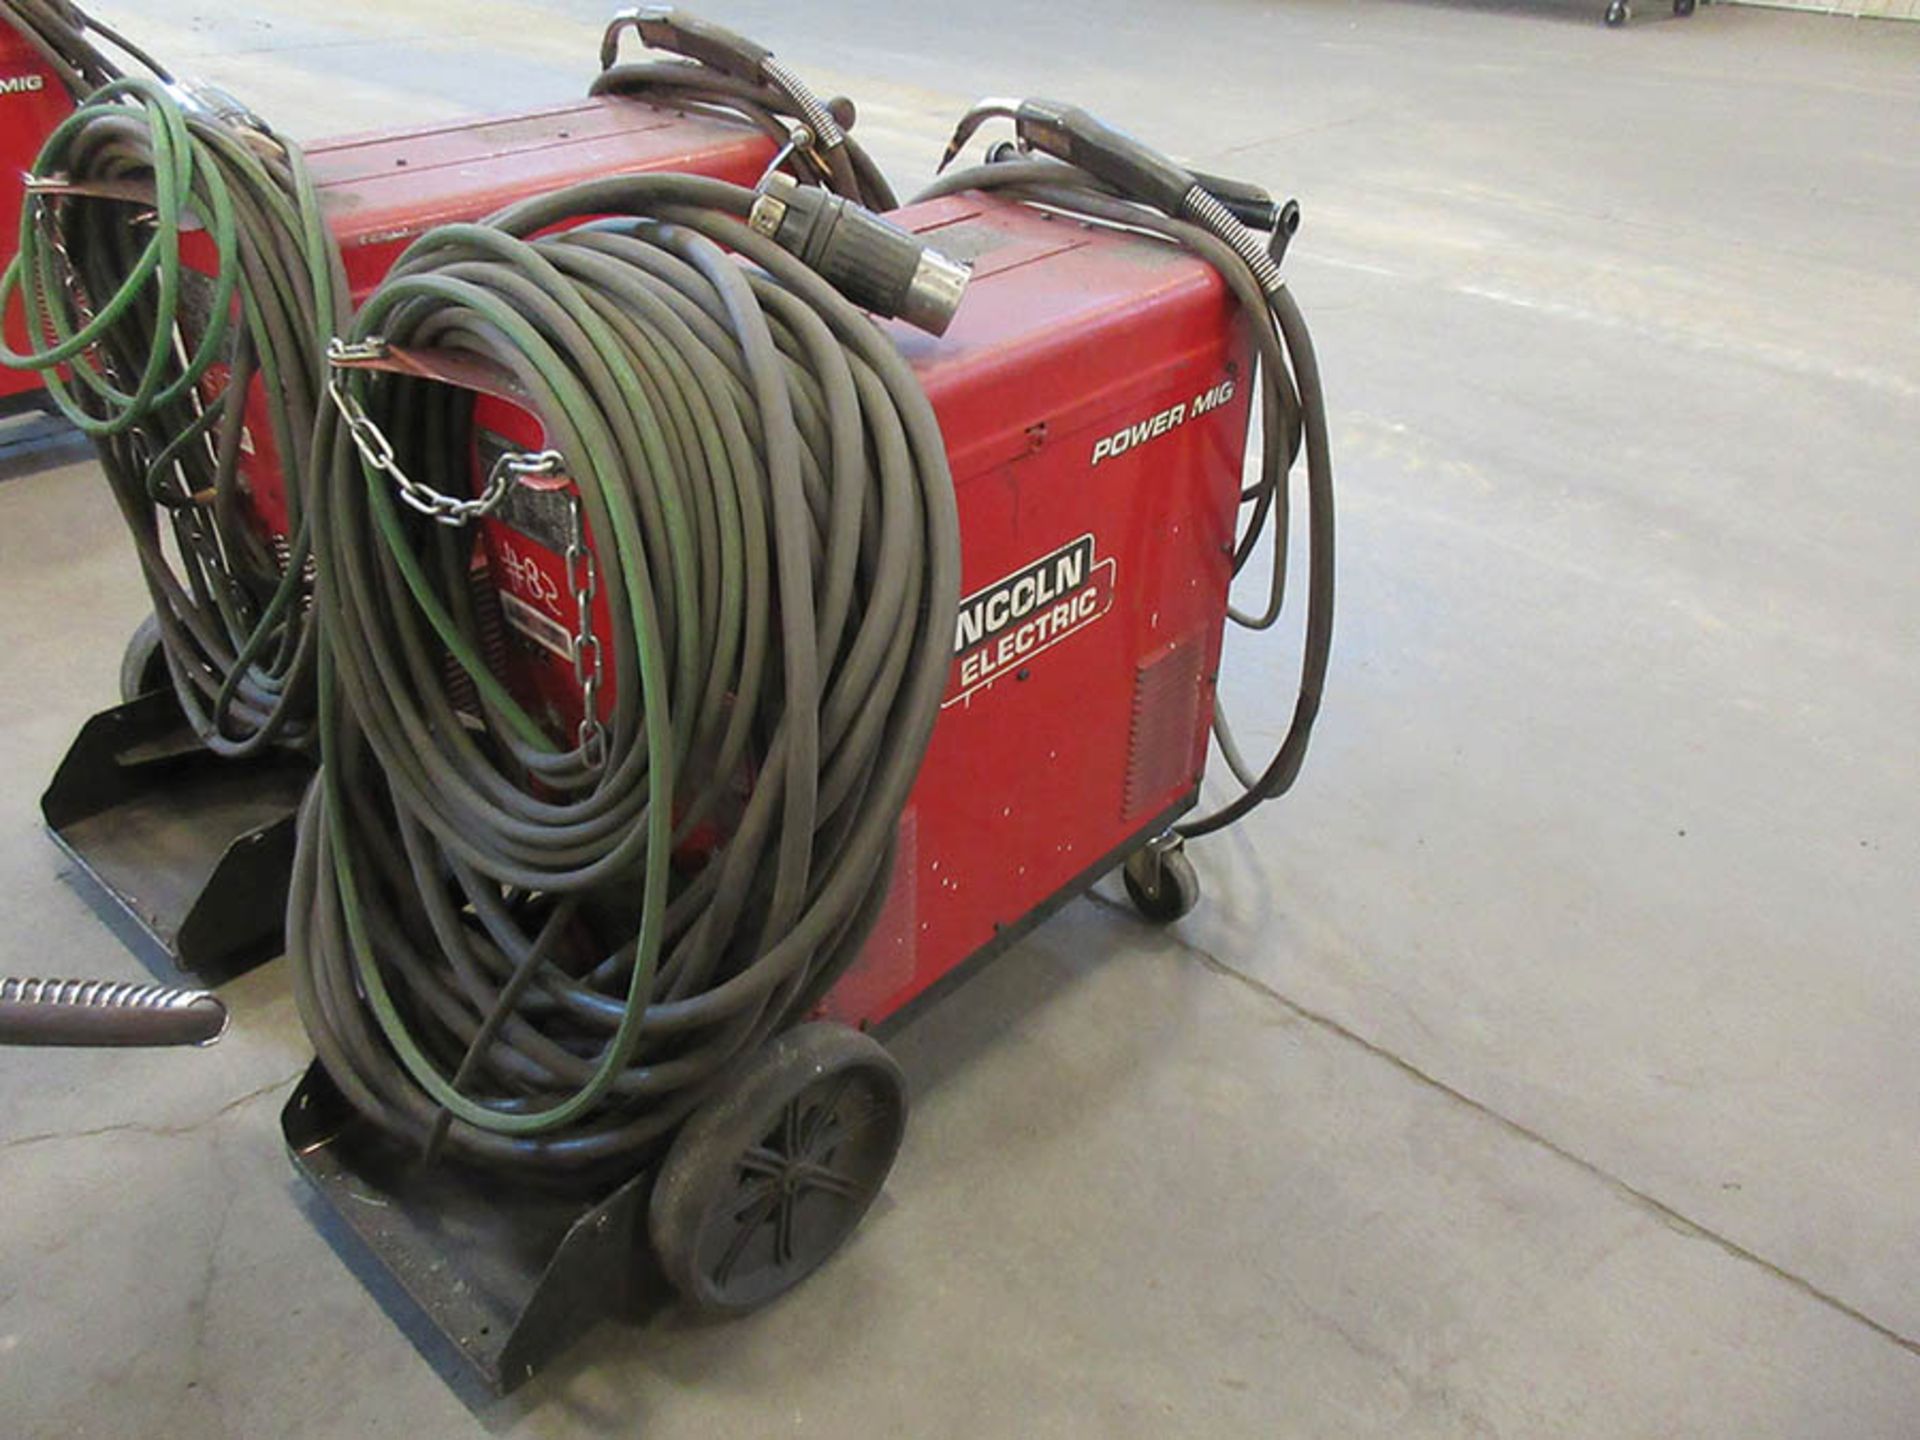 LINCOLN ELECTRIC 350MP POWER MIG WELDER WITH TWECO WELDSKILL MIG GUN, #82 - Image 2 of 3